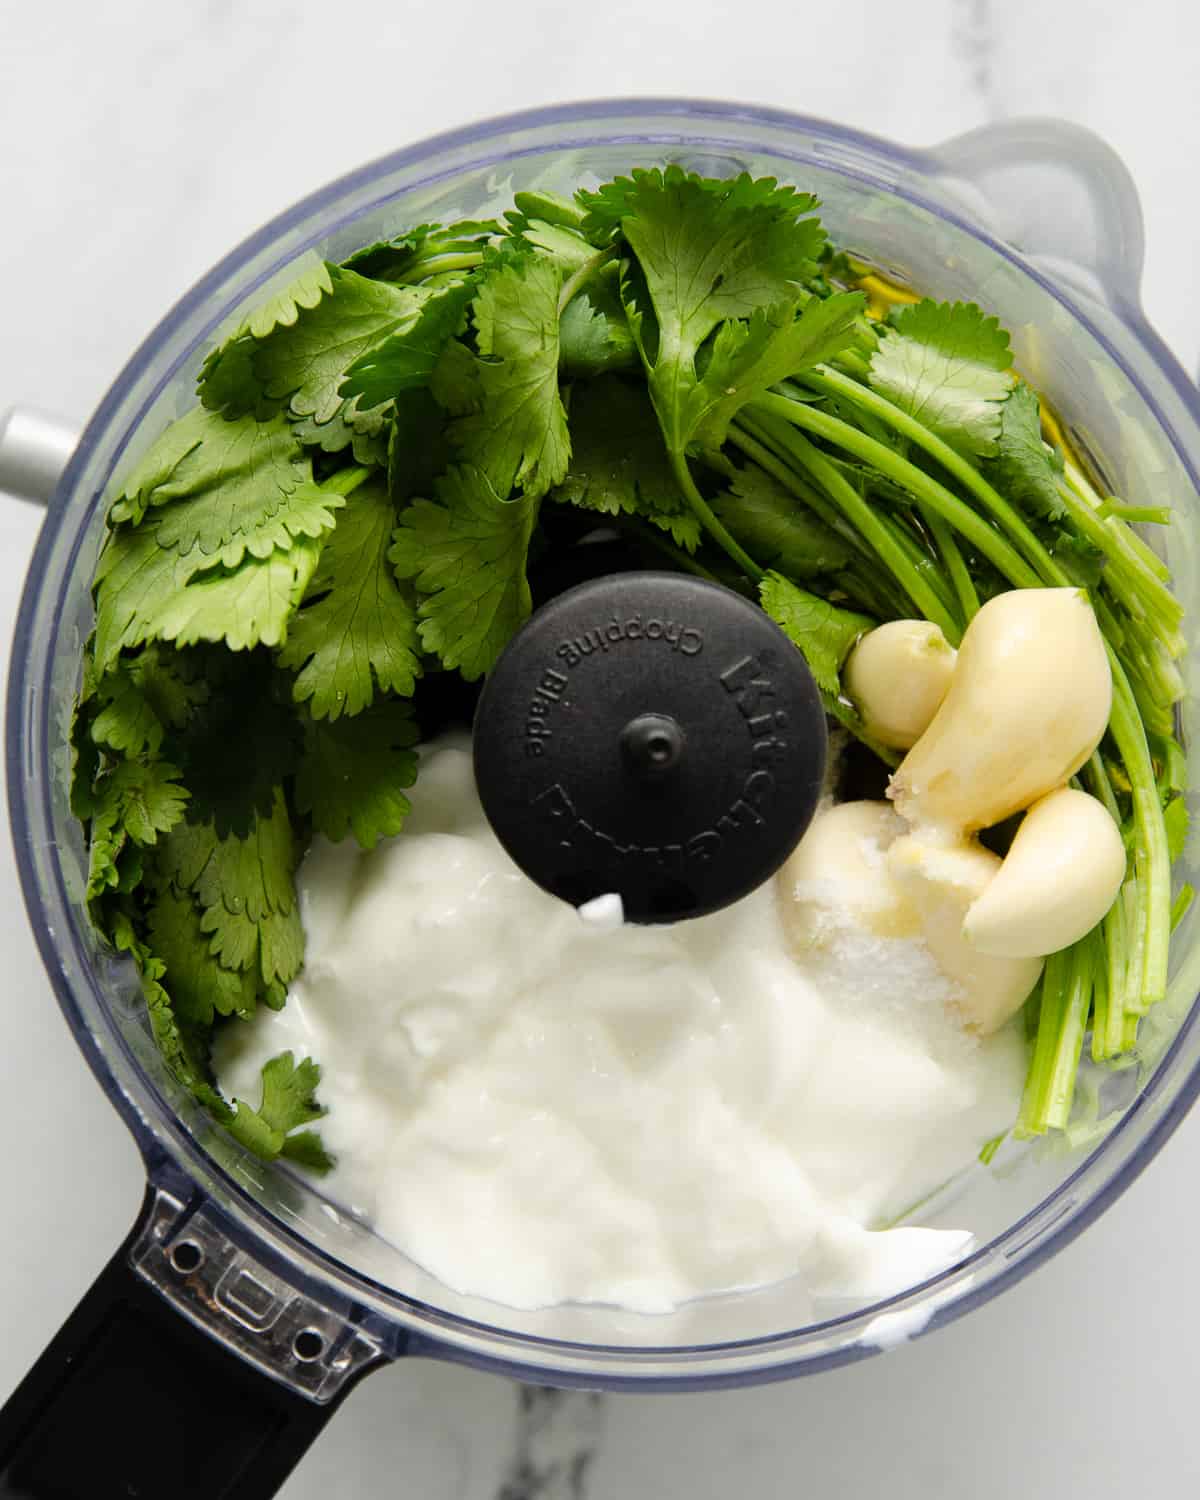 Ingredients for cilantro garlic sauce in a food processor before blending.